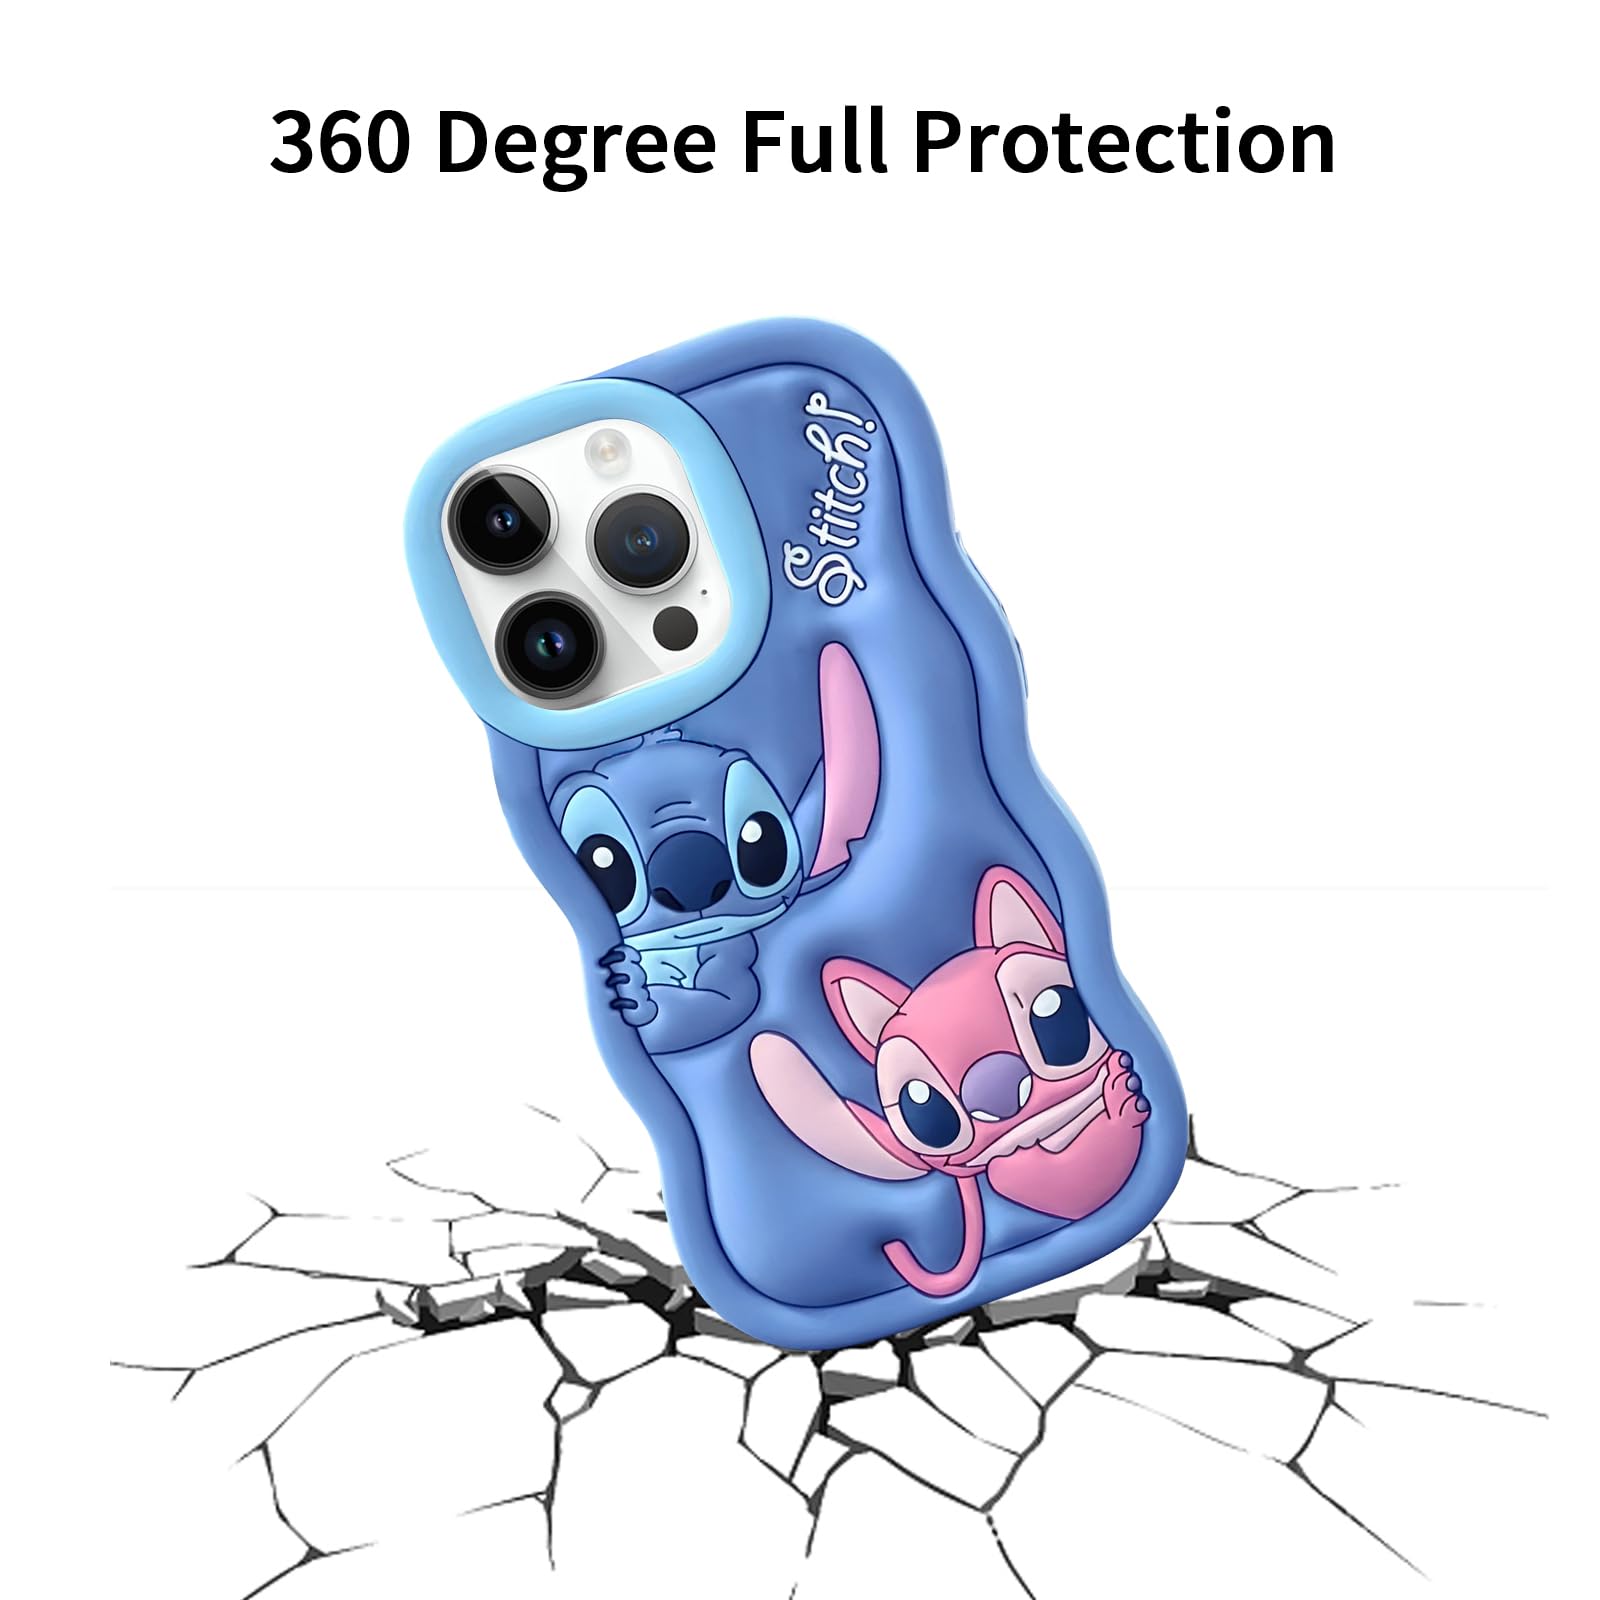 FINDWORLD Compatible with iPhone 14 Pro Max Case, Cute 3D Cartoon Unique Cool Soft Silicone Animal Character Protector Boys Kids Girls Gifts Cover Skin for iPhone 14 Pro Max